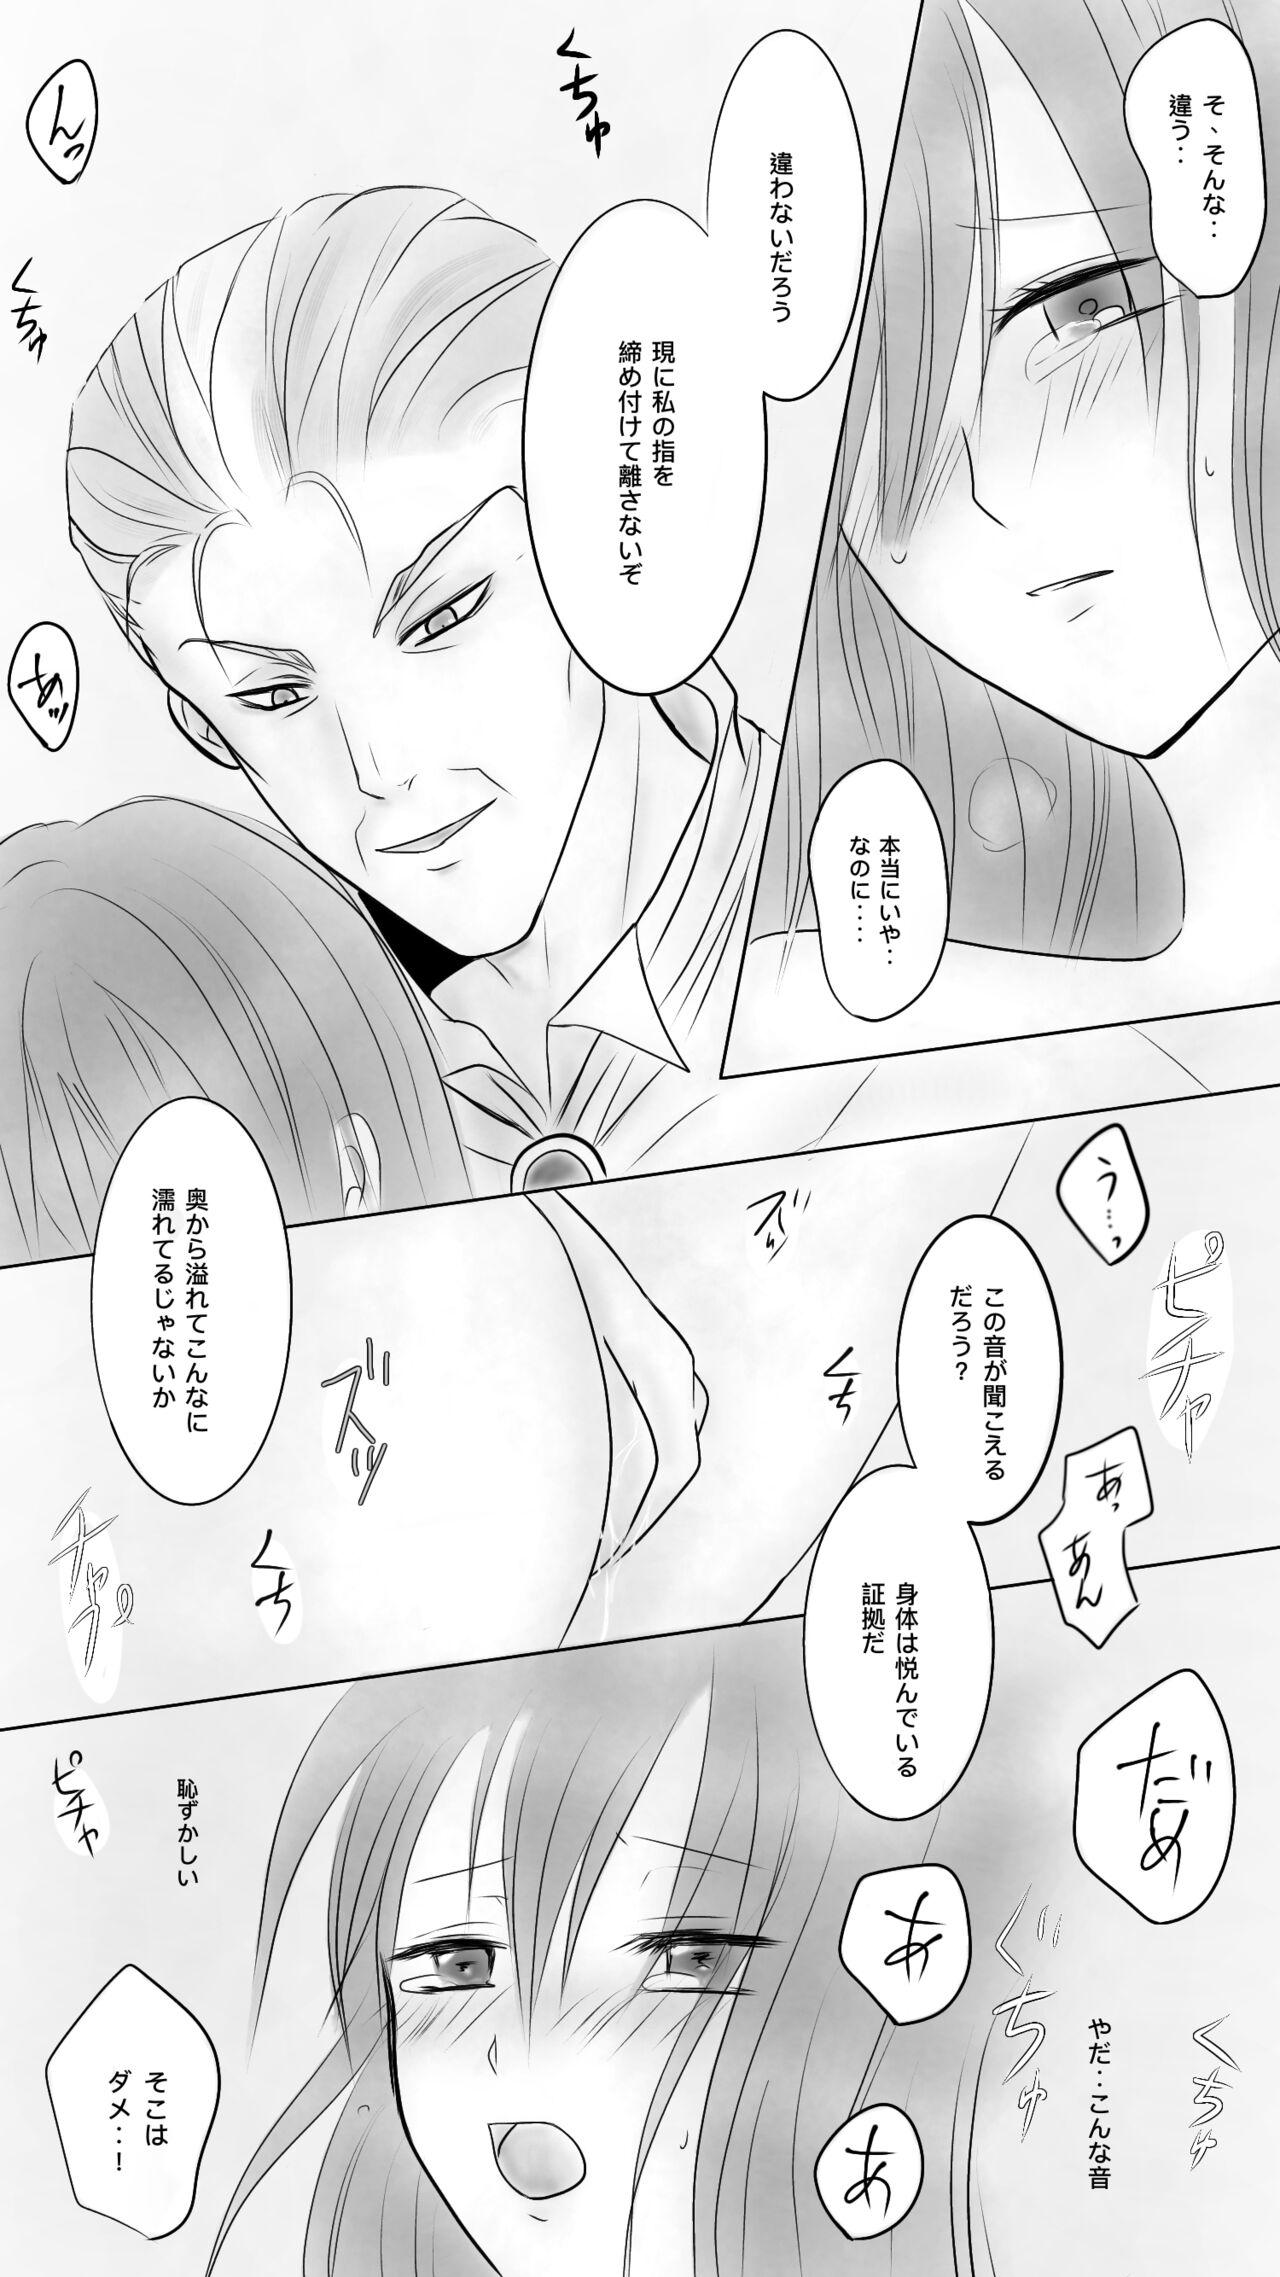 China Queen 3 - Disney twisted-wonderland Gay Straight - Page 6